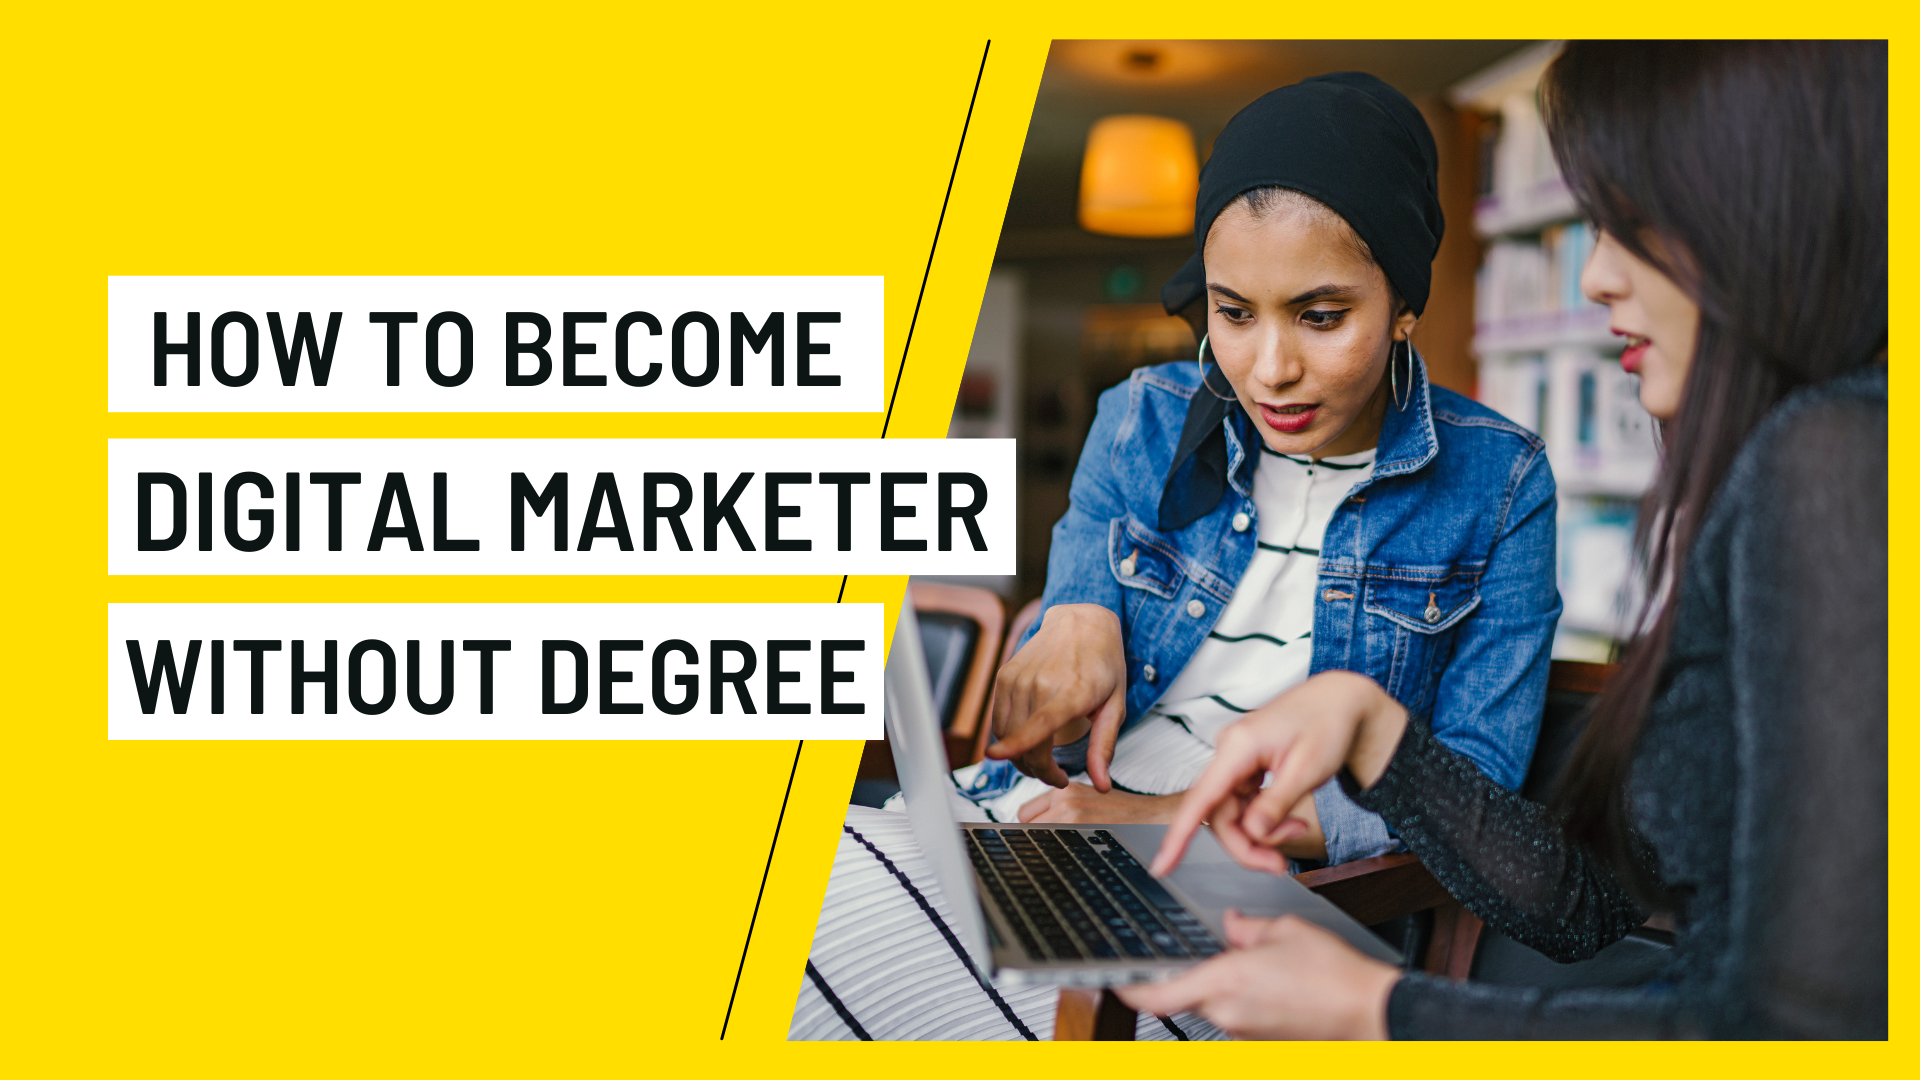 how-to-become-a-digital-marketer-without-degree-online-marketing-jobs